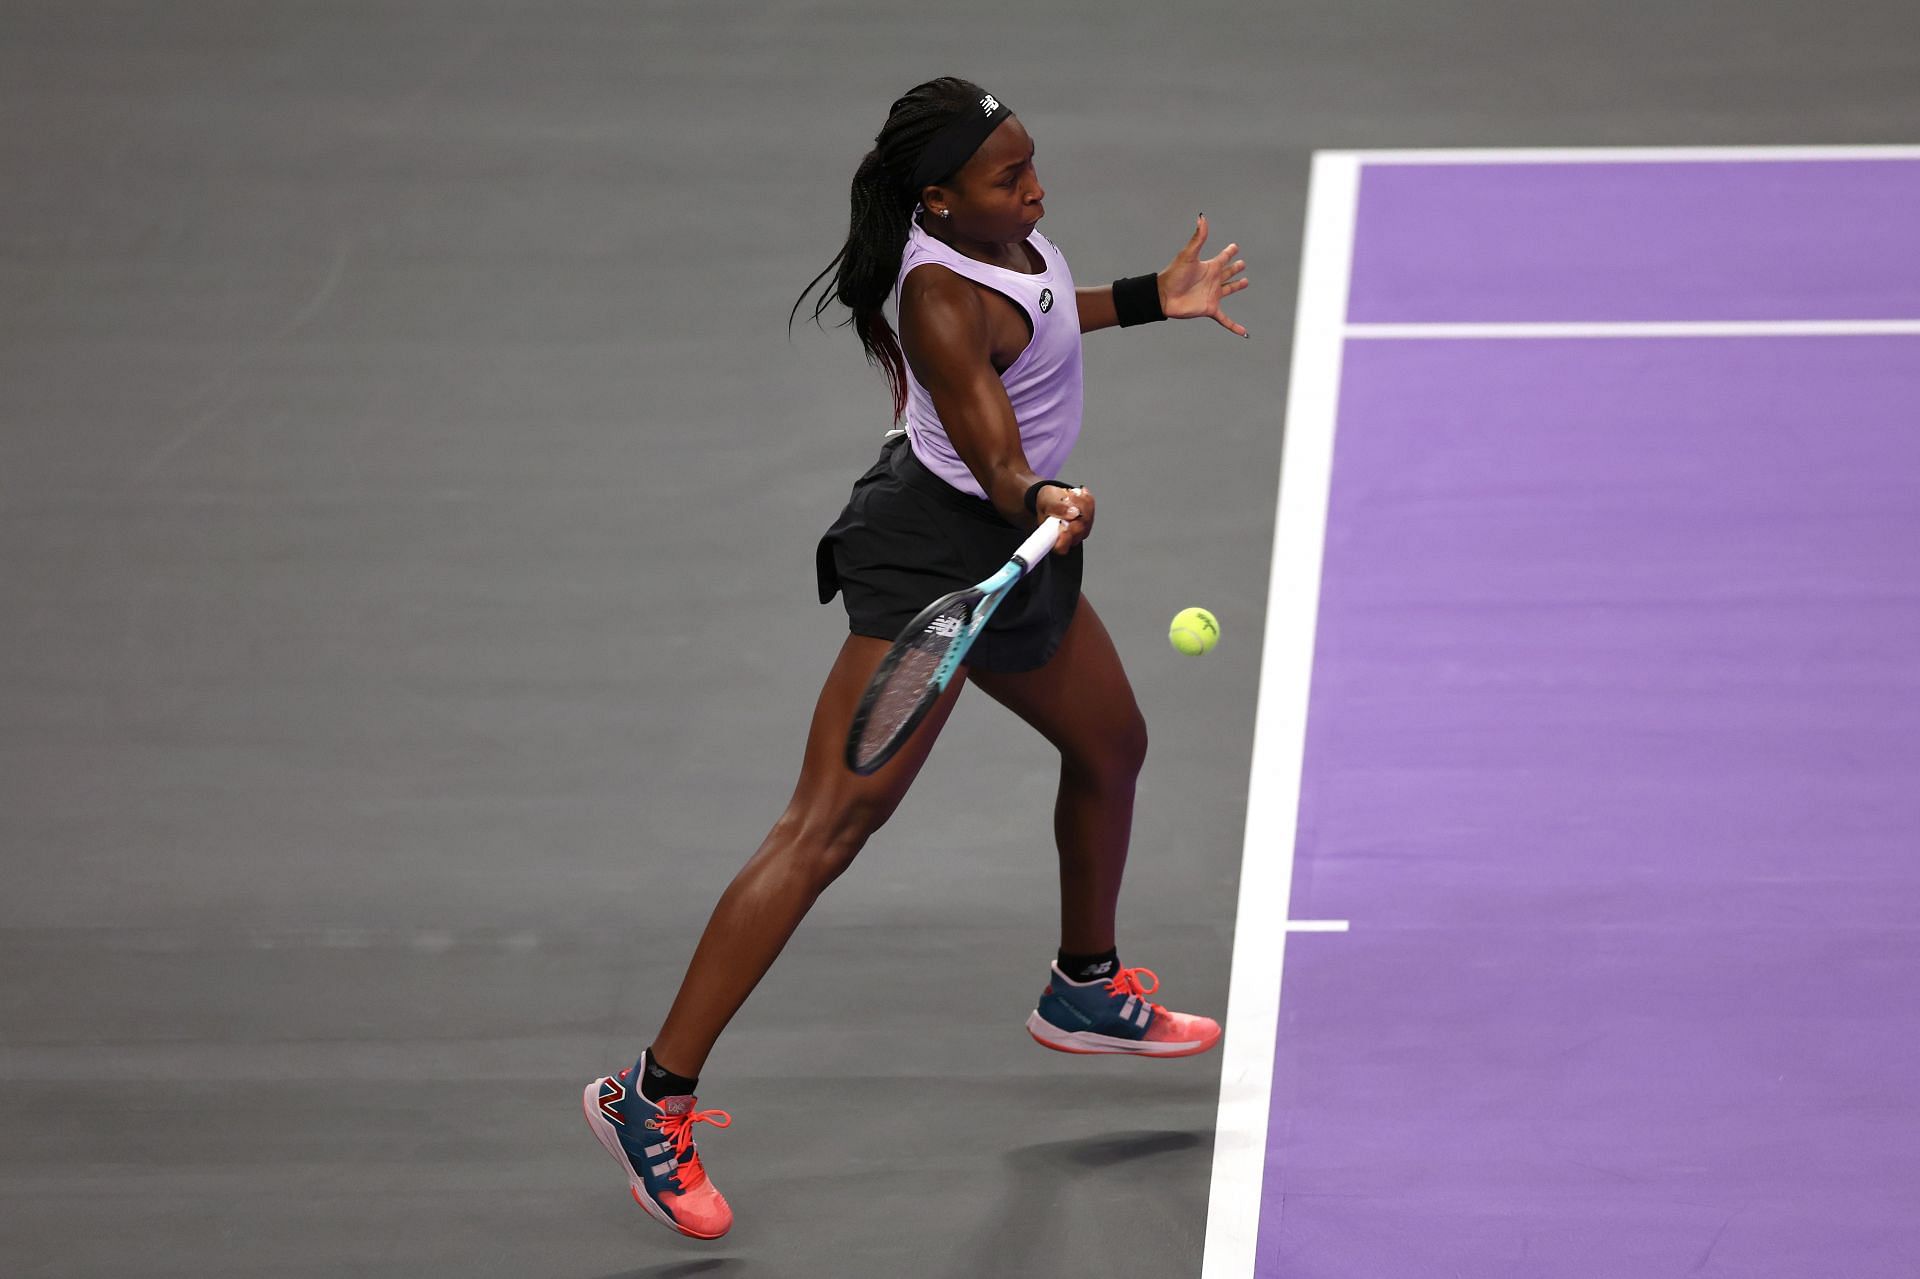 WTA Finals 2022 Schedule Today TV Schedule, start time, order of play, live stream details and more Day 4